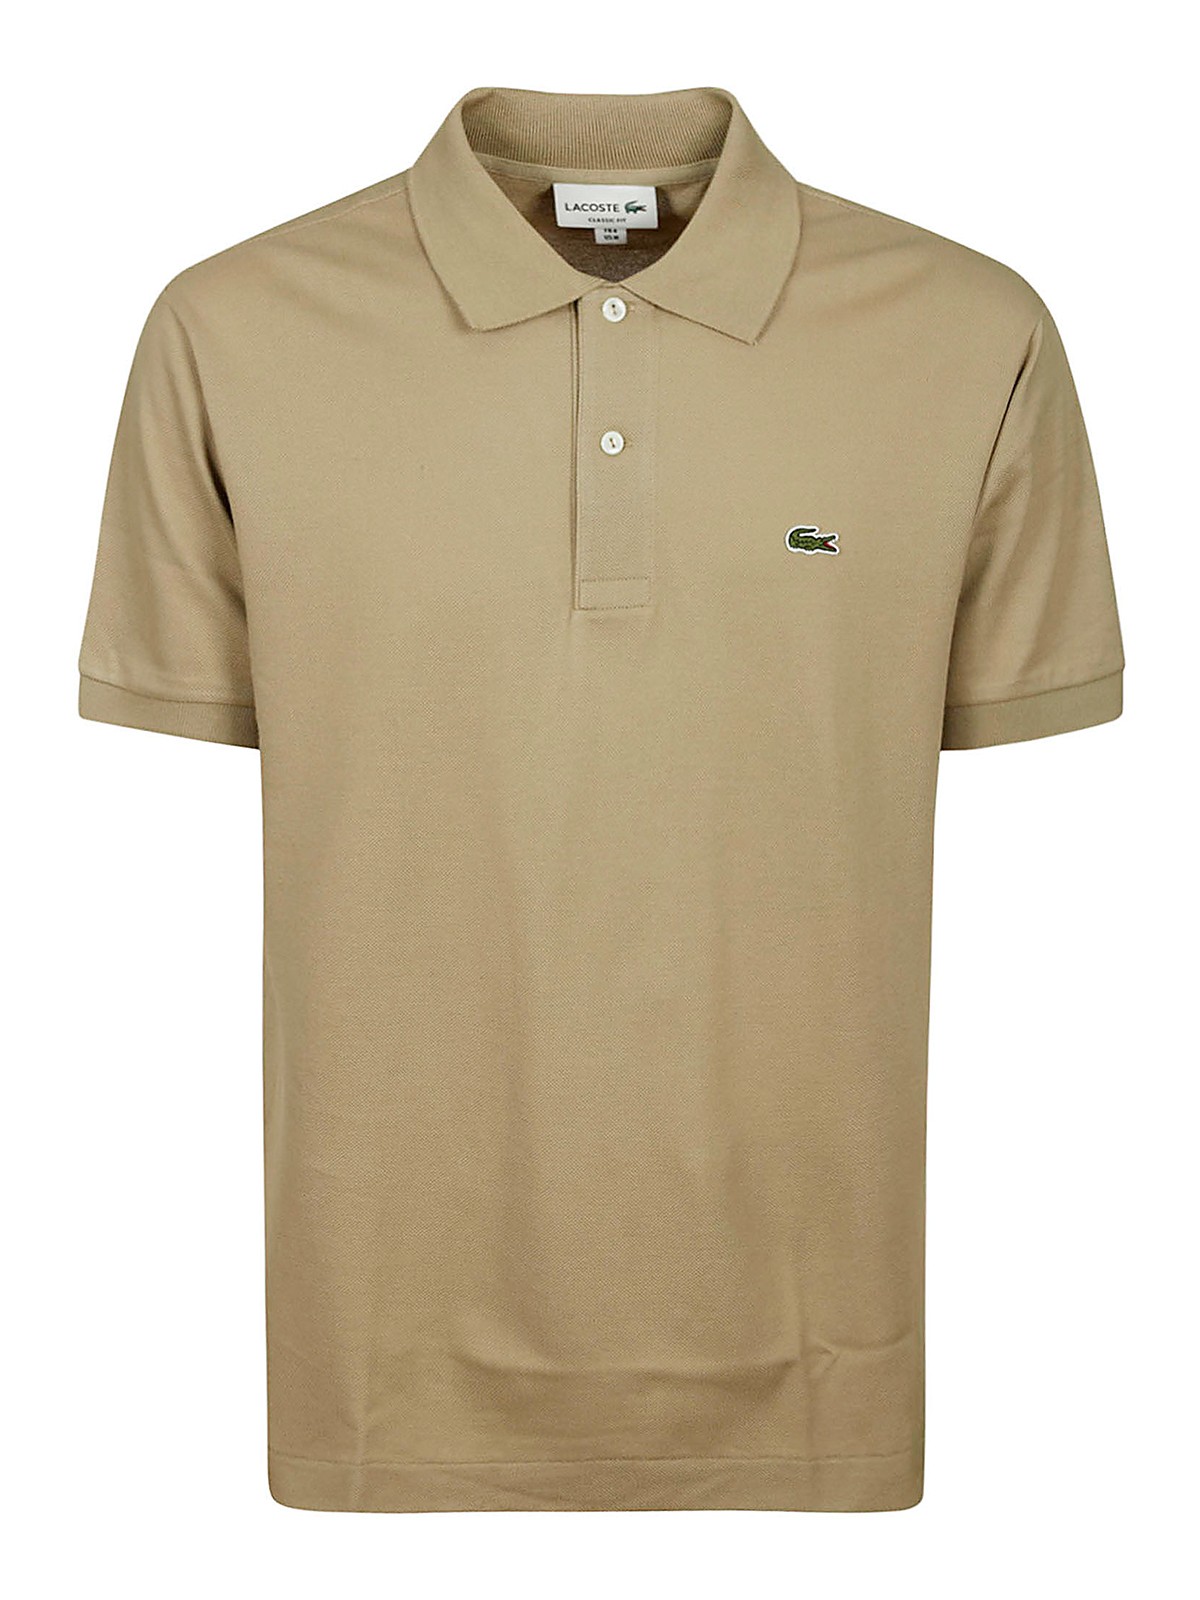 pop Perle hvis du kan Polo shirts Lacoste - Polo - 1212CB8 | Shop online at THEBS [iKRIX]